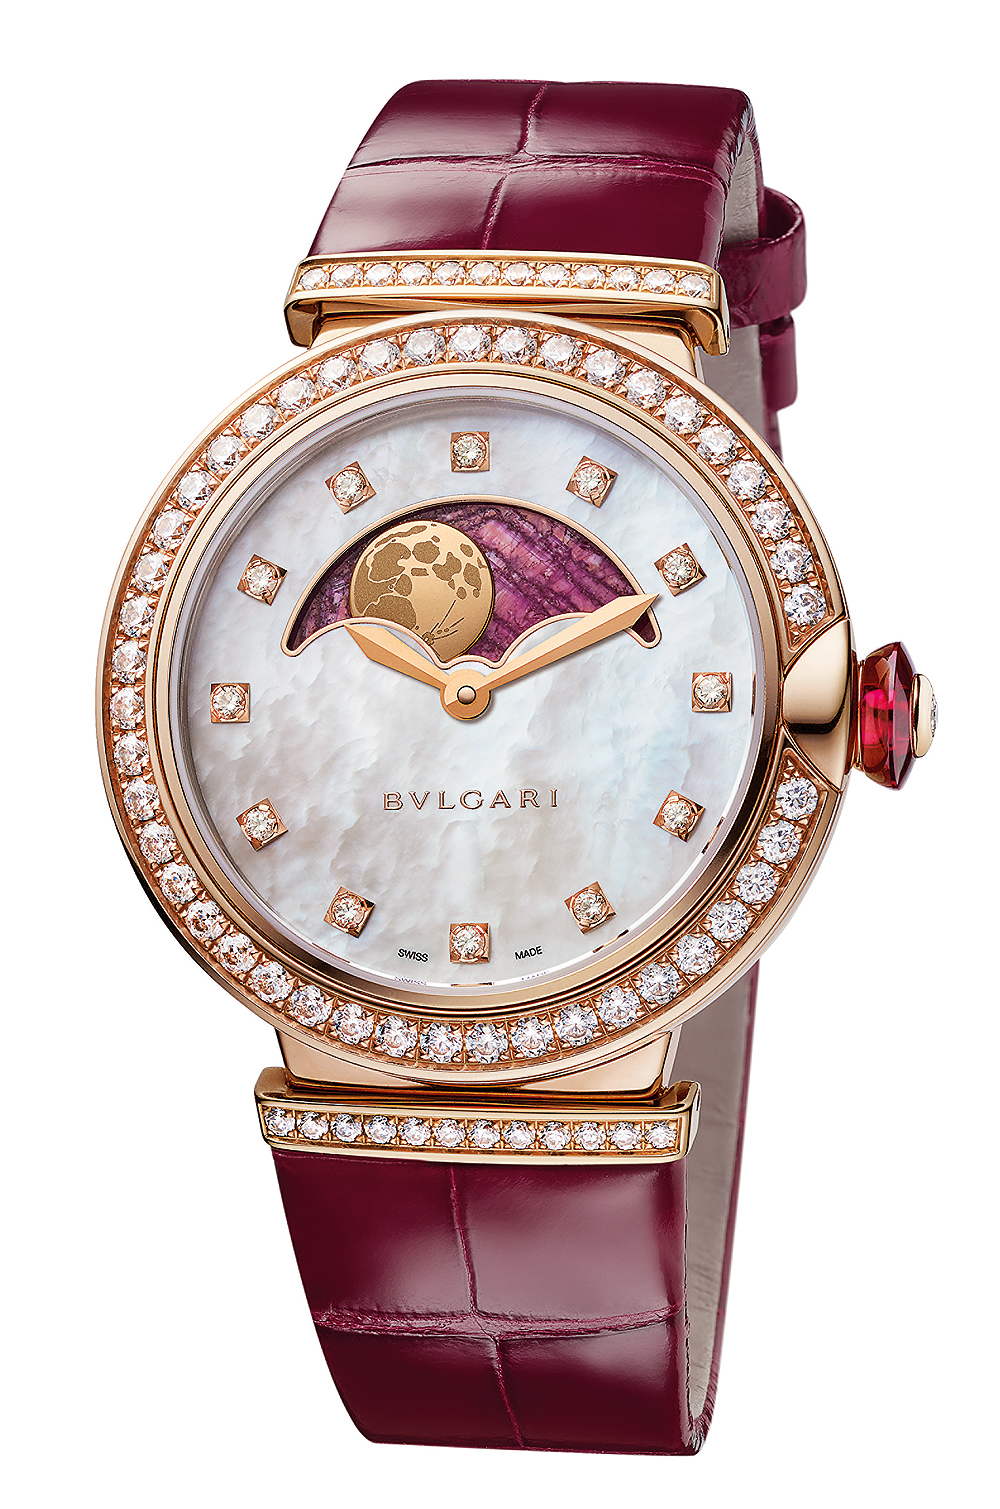 24 Ladies' Watches for Your Mother's Day Consideration | WatchTime ...